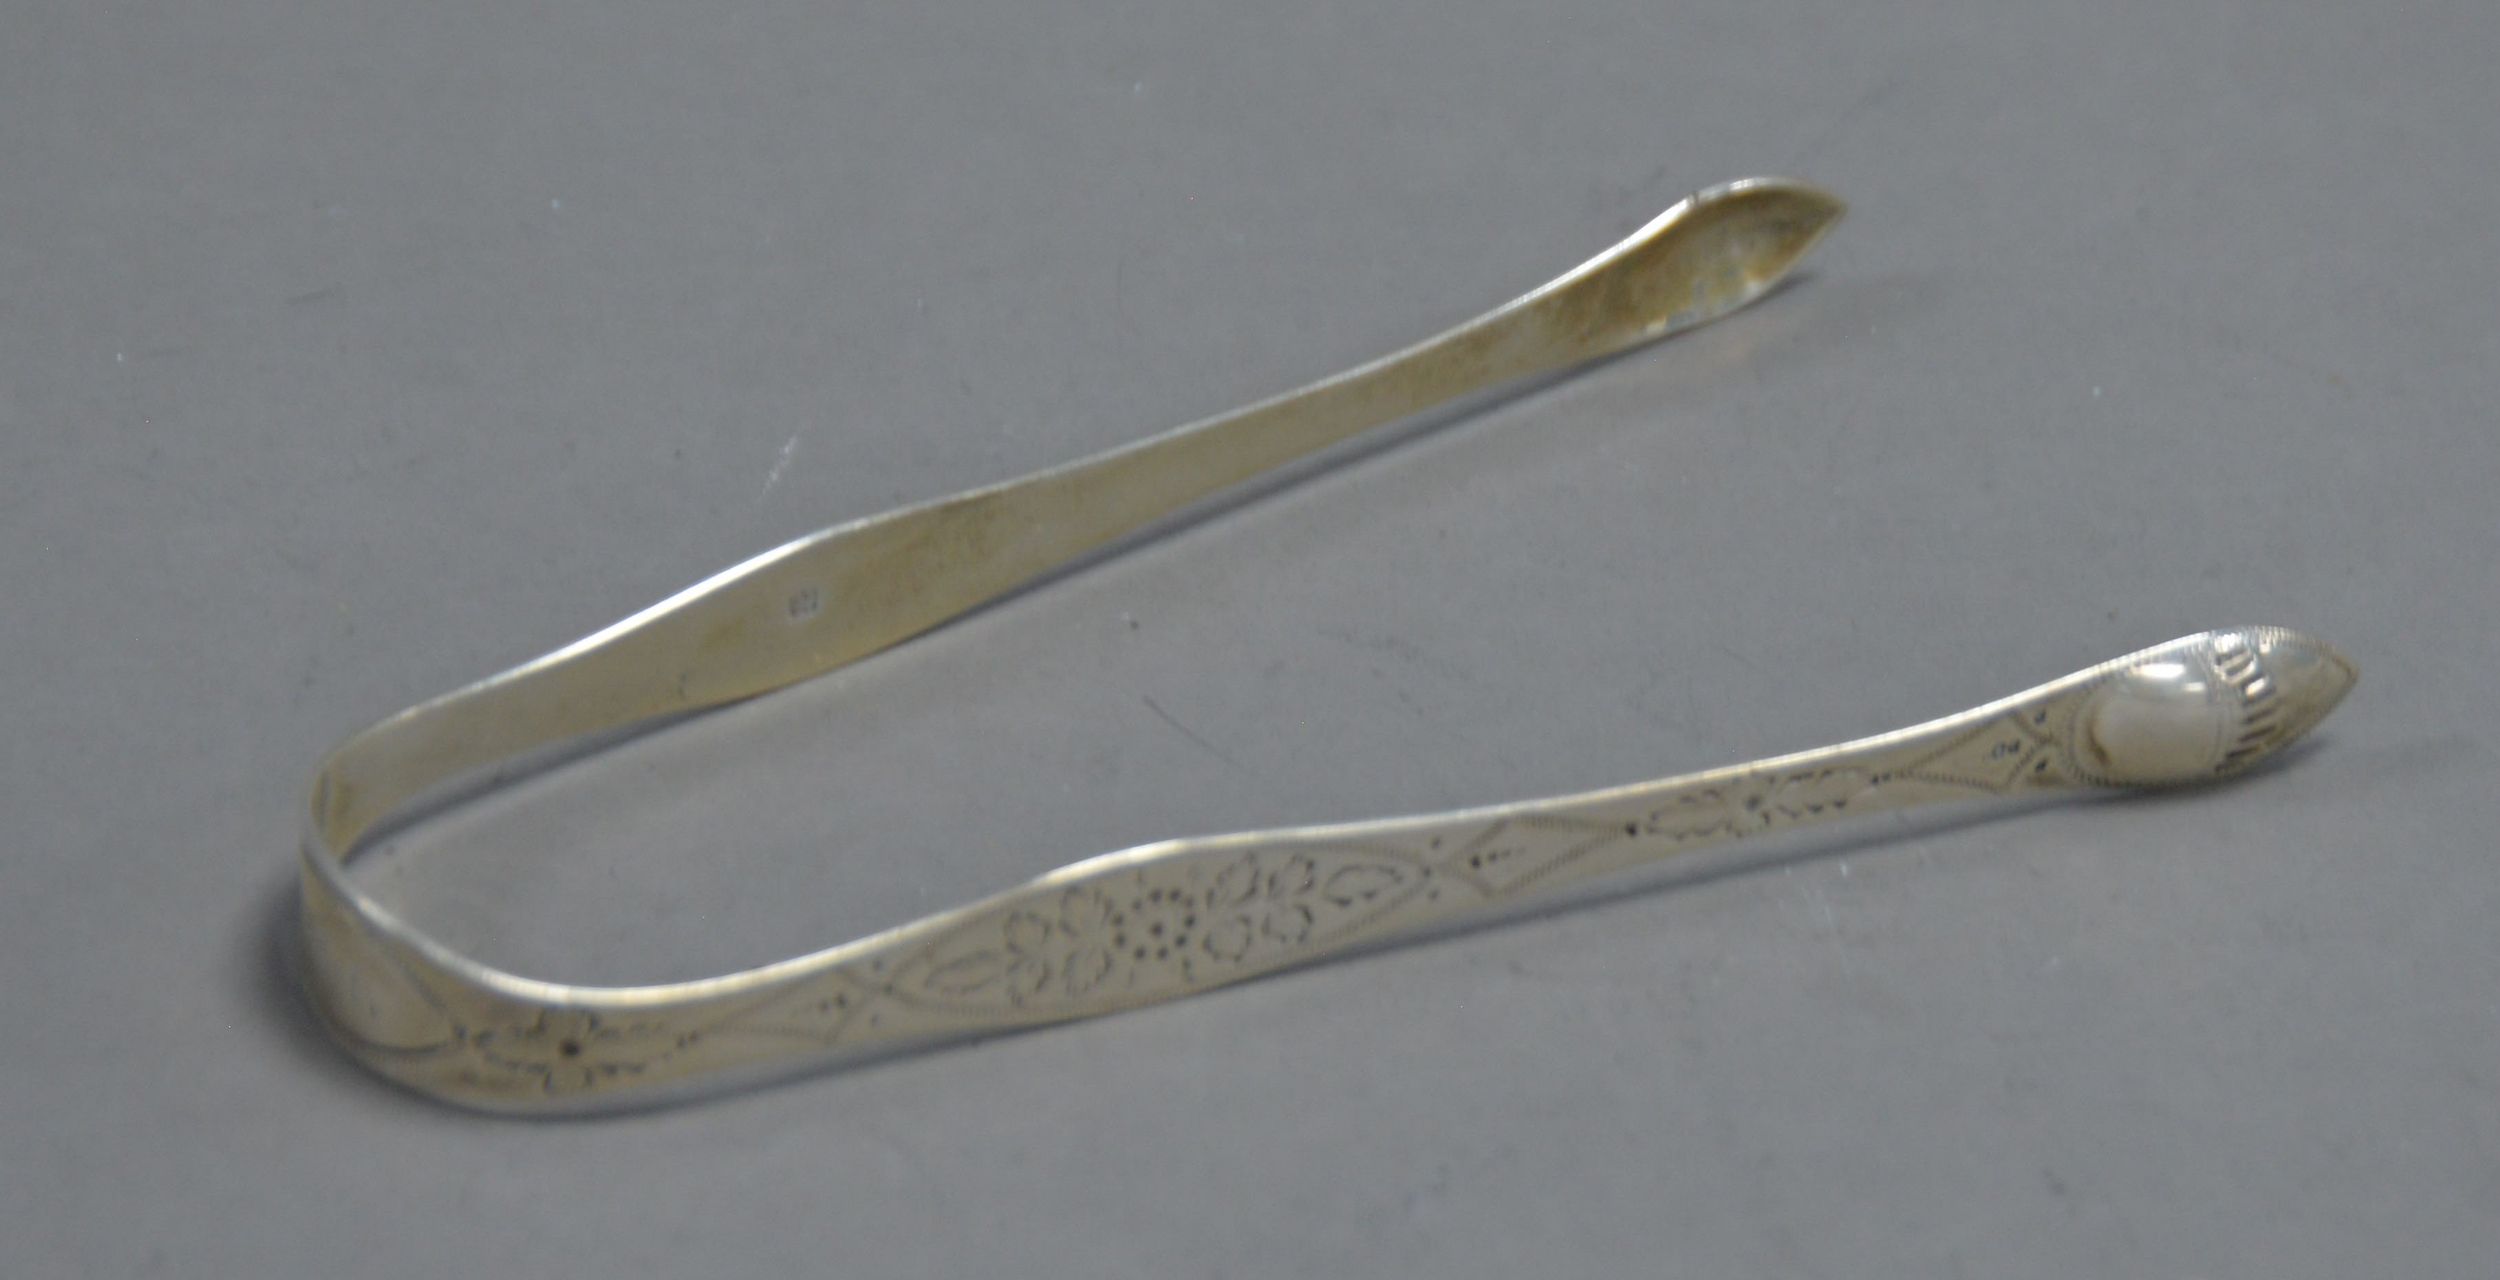 PAIR OF GEORGE III BRIGHT CUT SILVER SUGAR TONGS BY PETER AND ANN BATEMAN, initialled, 5 ½” (14cm) - Image 6 of 6